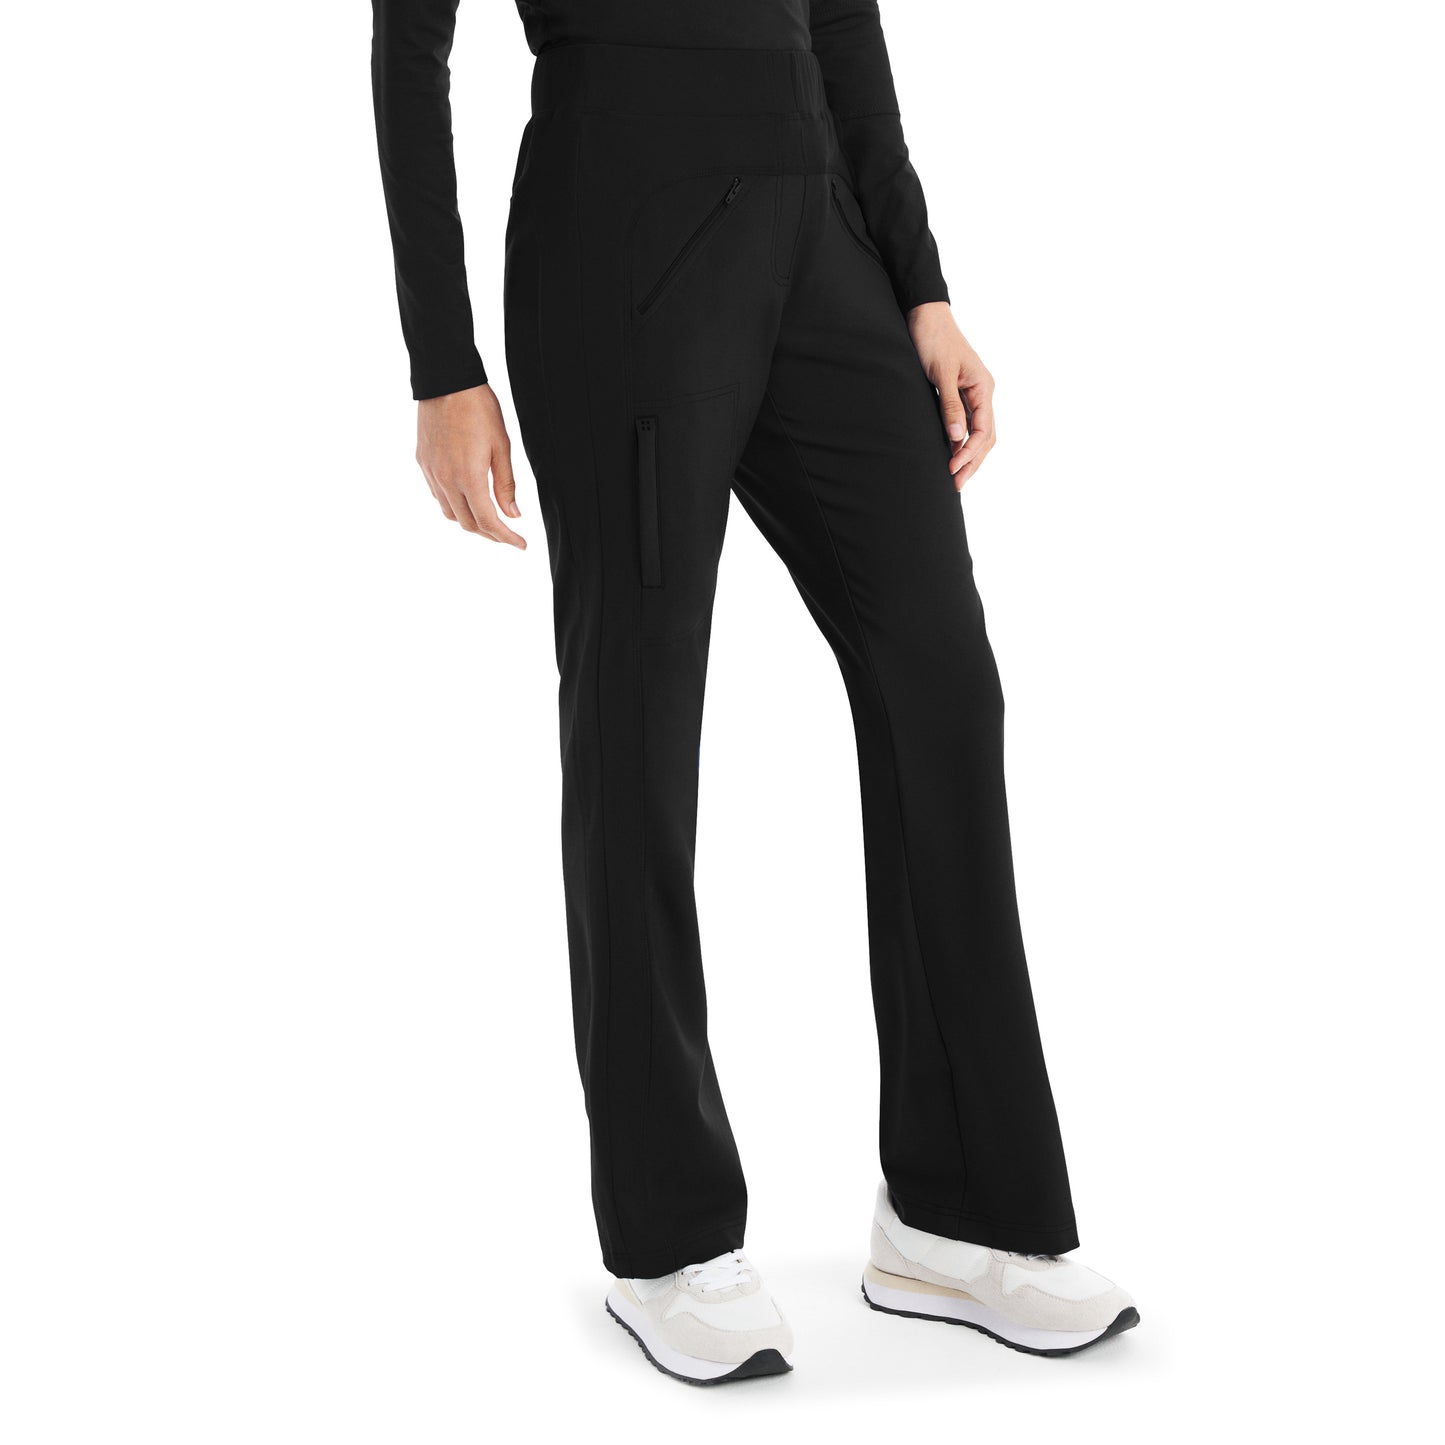 Women's straight pants - CRFT - WC414T tall